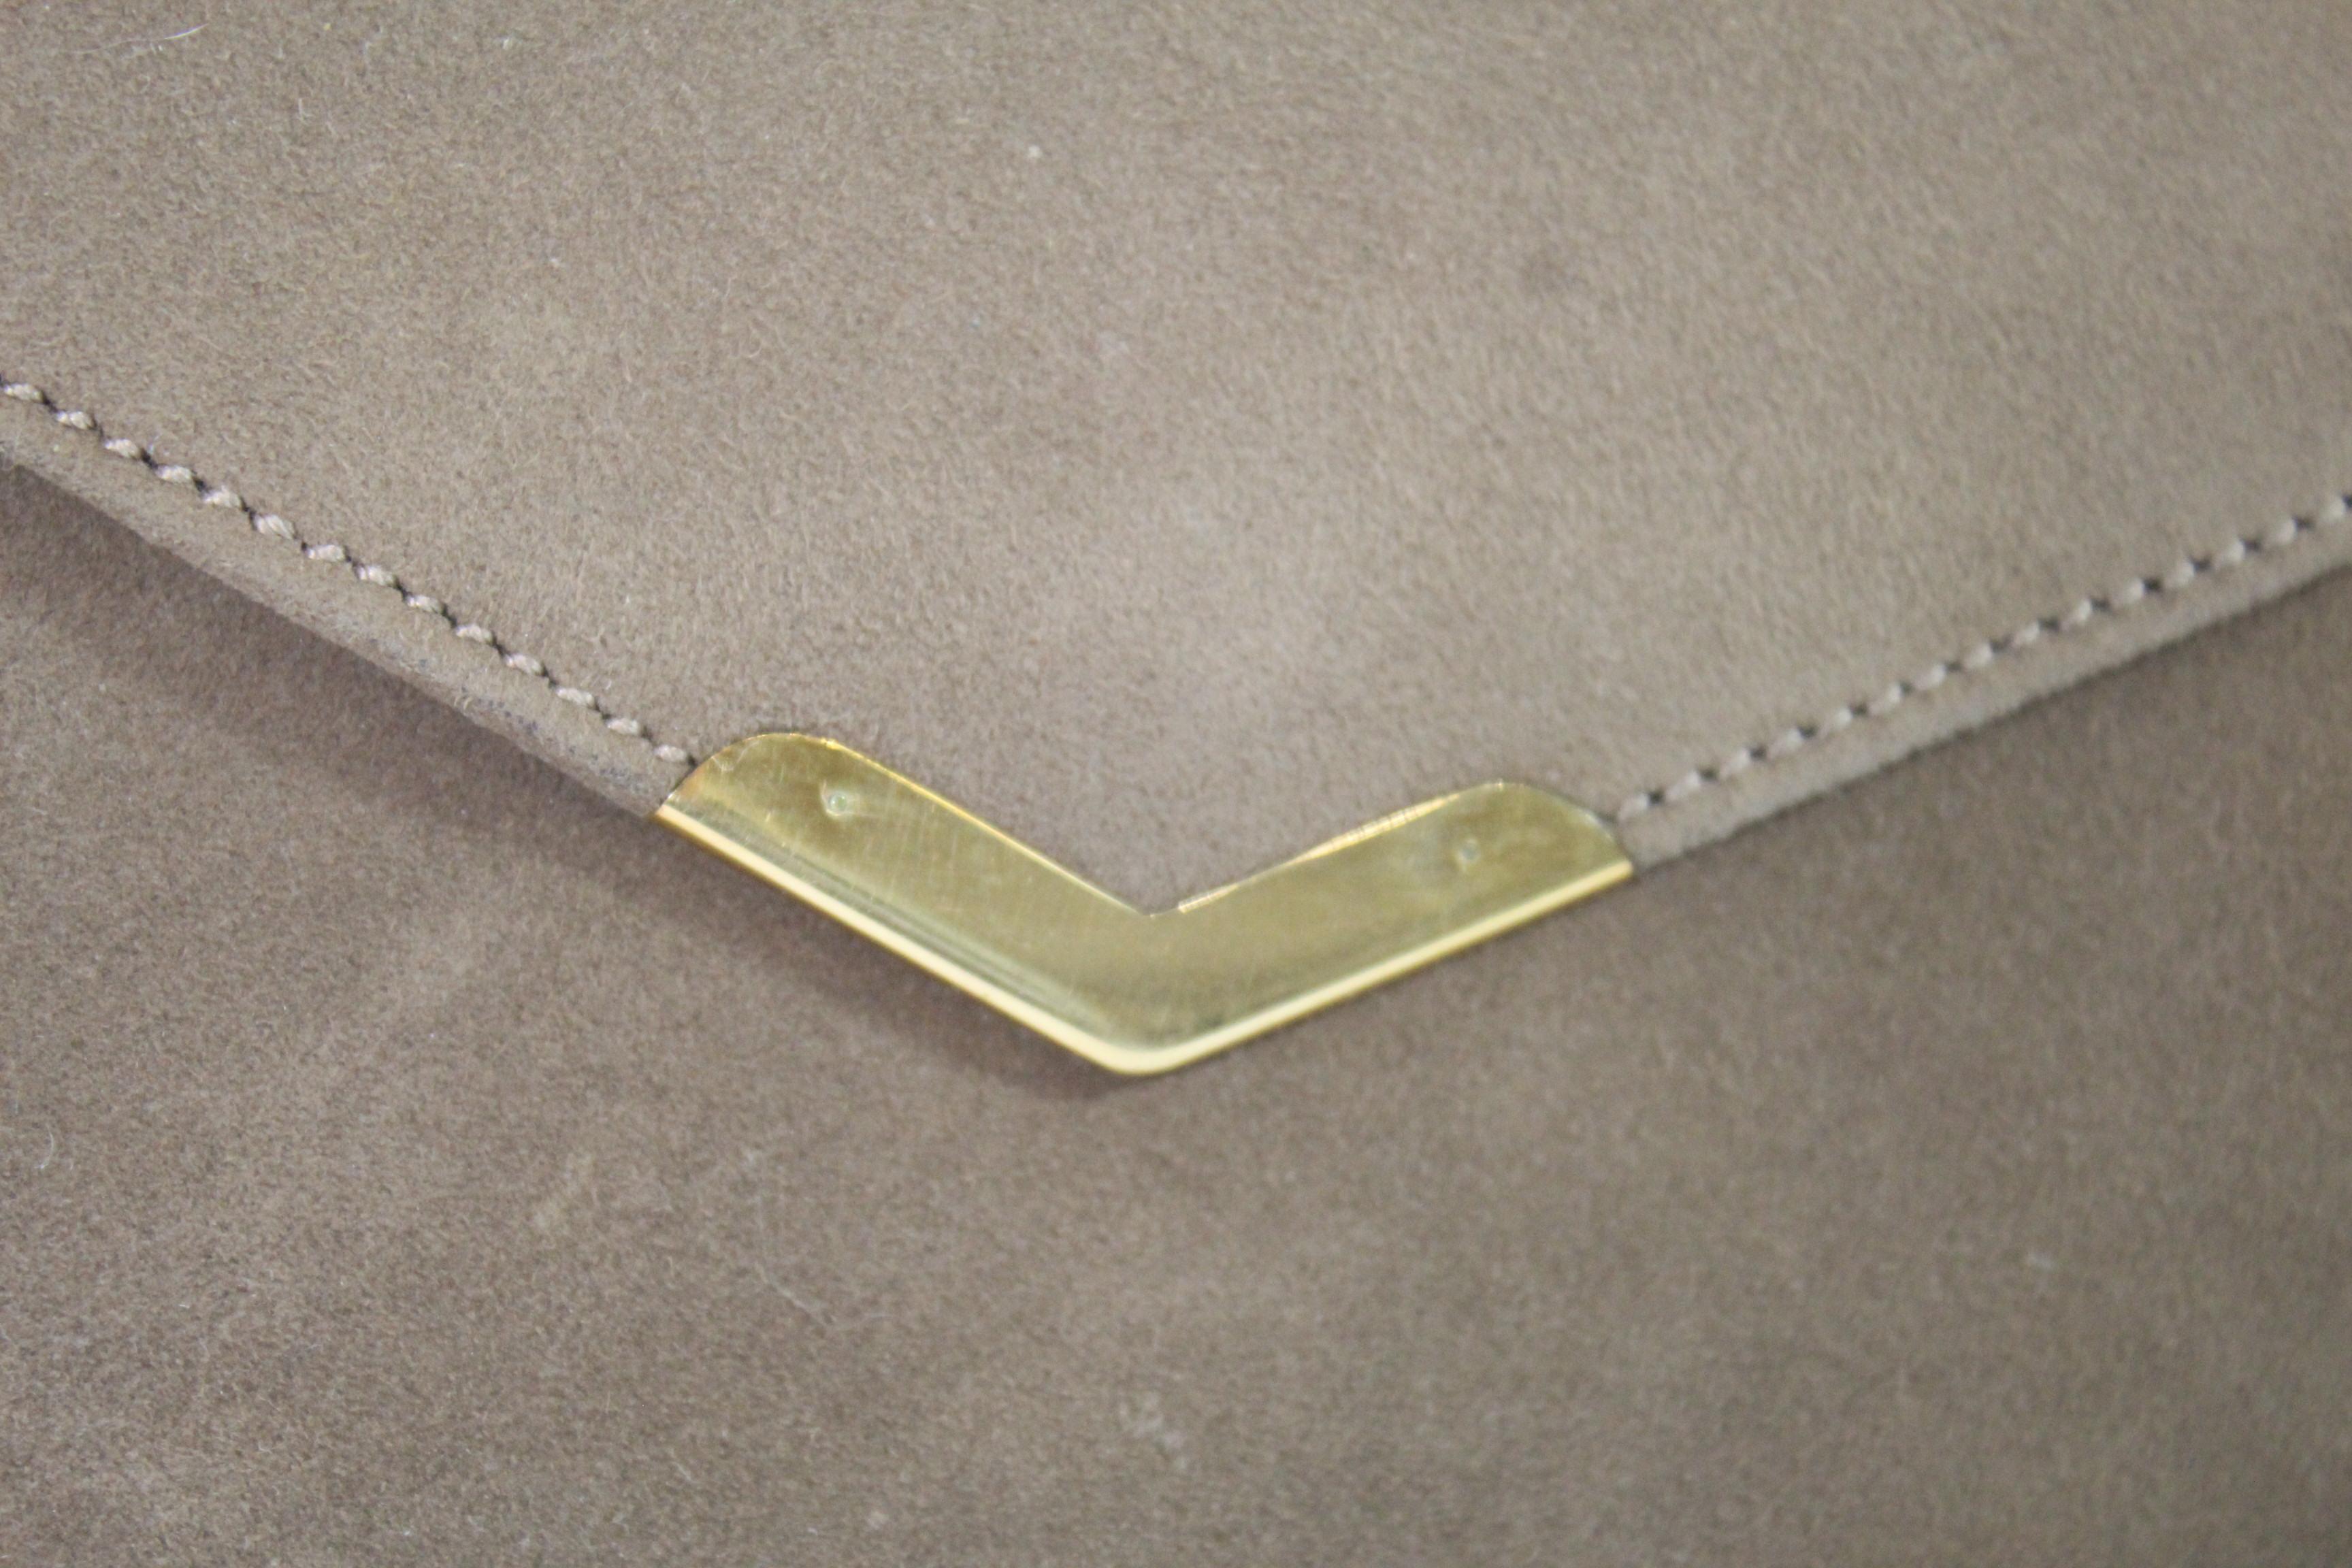 Hermes 60's vintage small clutch.
clasp in 18k solid gold
Good vintage condition
Size aprox 20 cm